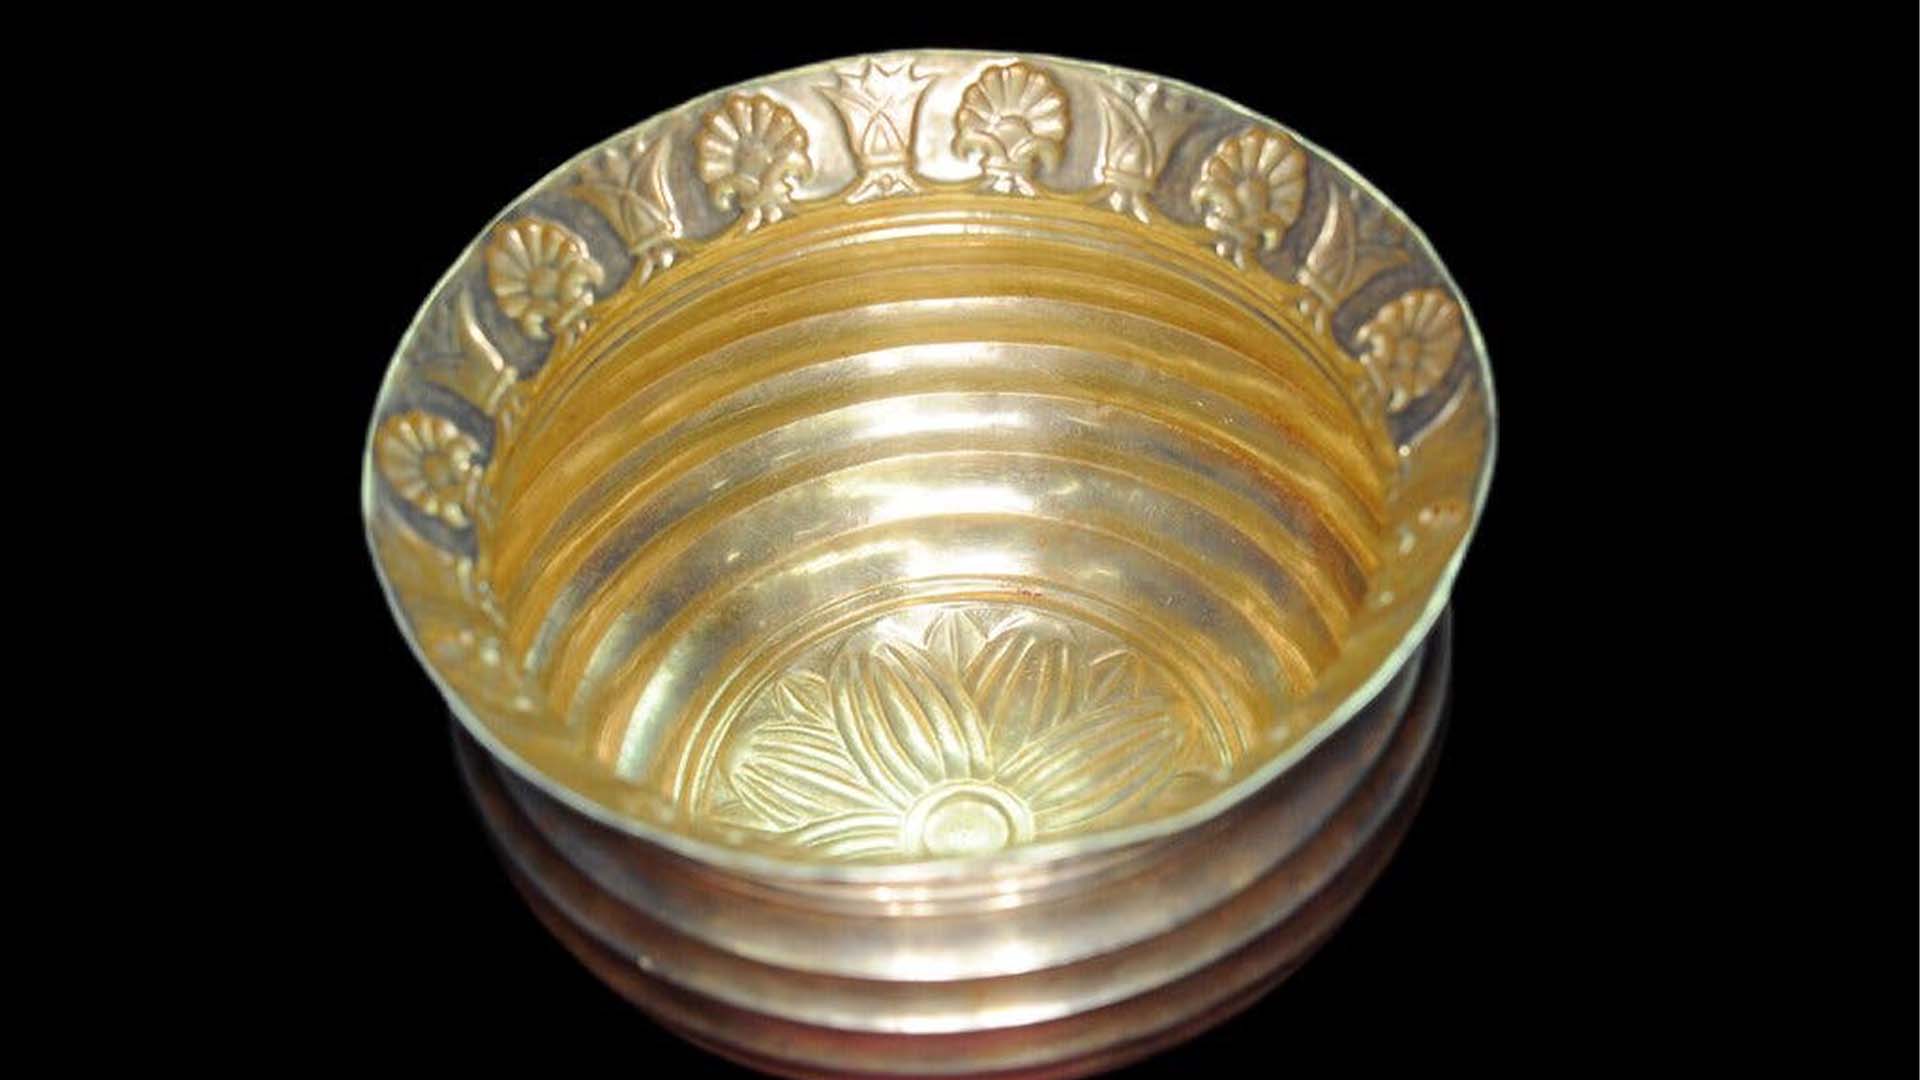  A golden bowl, valued at $200,000, is one of two looted artifacts returned to Iraq on Tuesday by the Manhattan District Attorney’s office. Photo Credit: Manhattan District Attorney’s Office